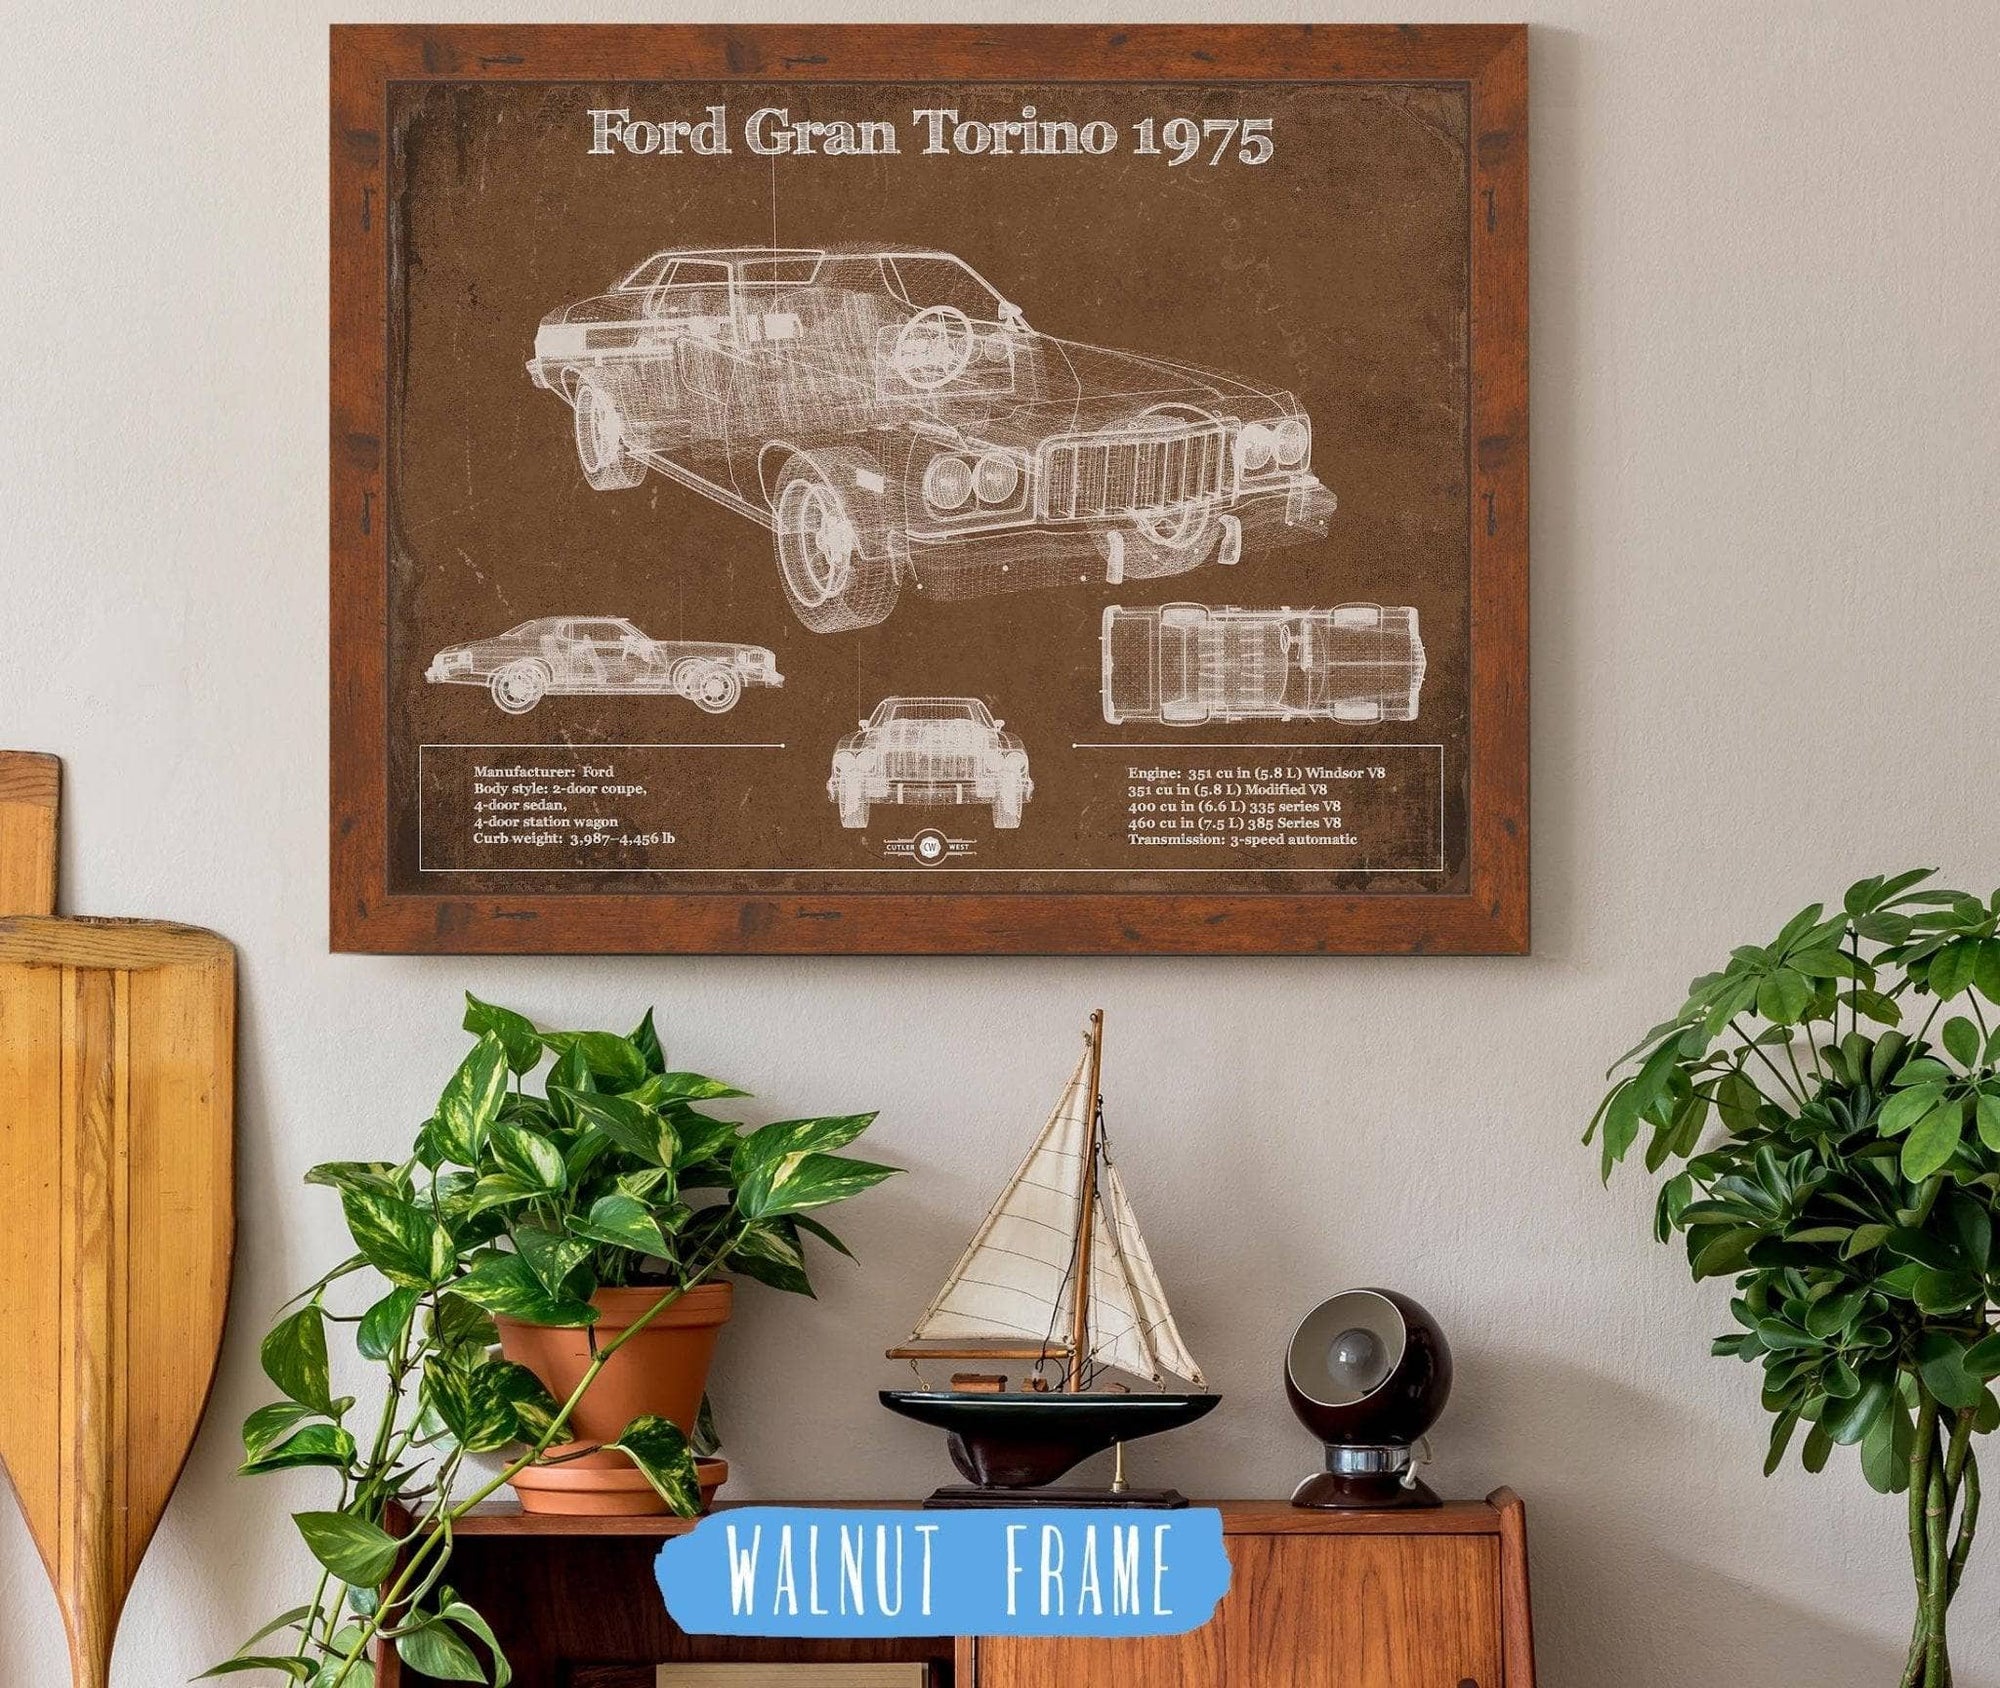 Cutler West Ford Collection 14" x 11" / Walnut Frame Ford Gran Torino 1975 Blueprint Vintage Auto Print 933350038_54812